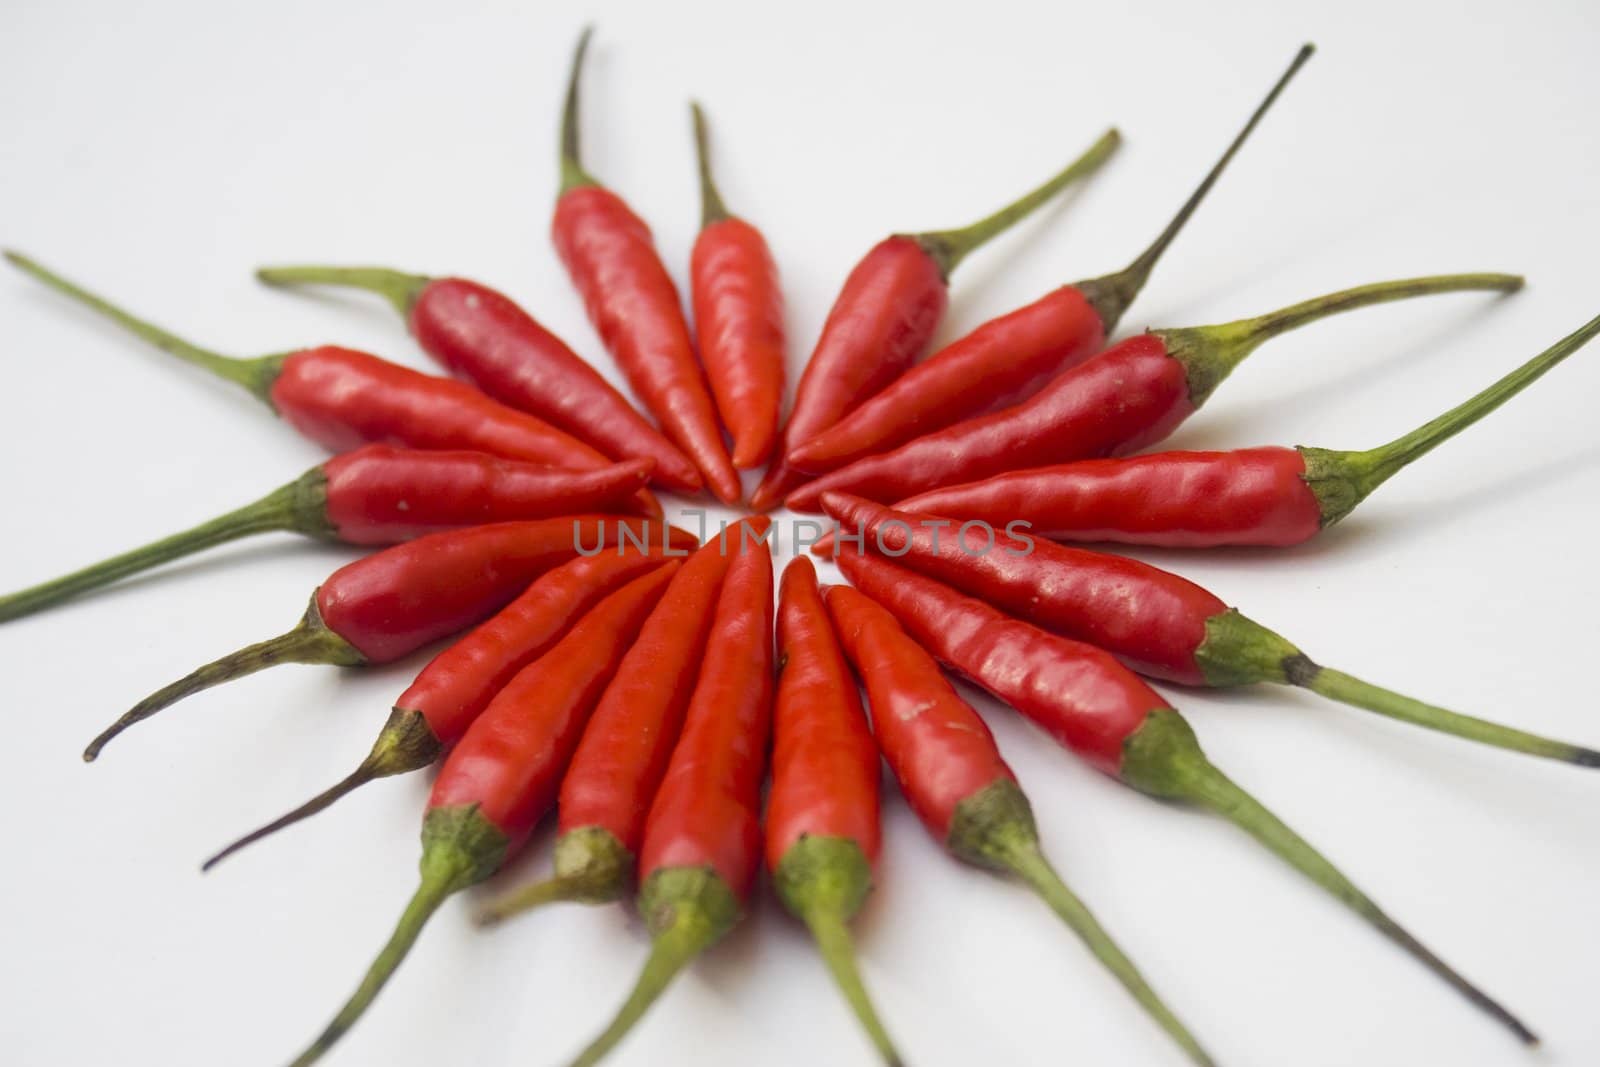 A pile of small red chili peppers arranged and isolated against a white background